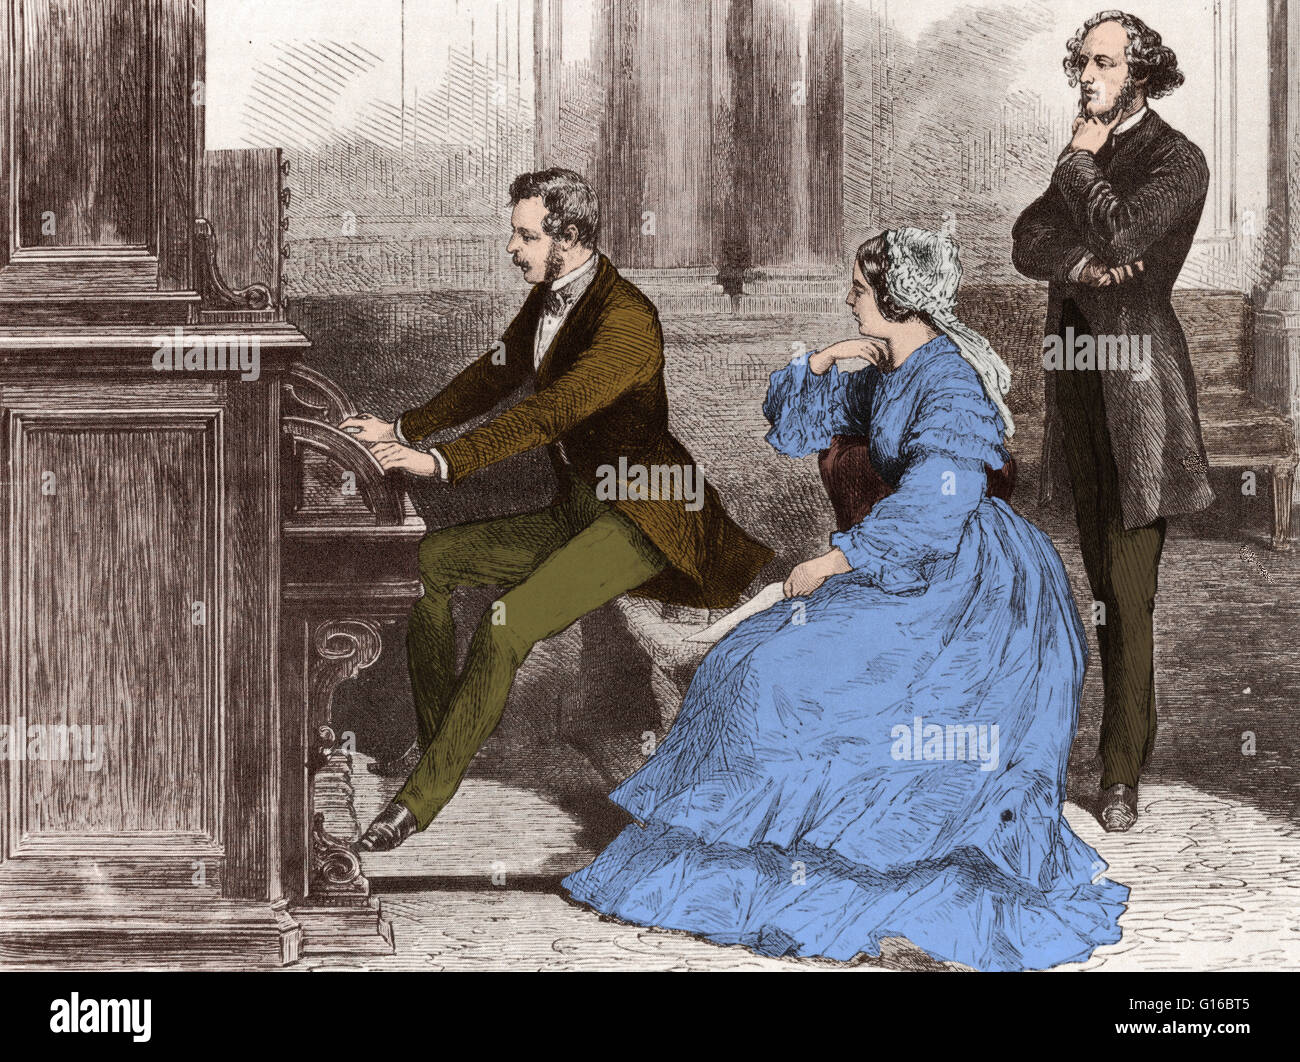 Color enhancement of an artwork entitled: The Prince Consort (Albert) playing the organ before Mendelssohn while the Queen looks on, at Buckingham Place, 1842. Jakob Ludwig Felix Mendelssohn Bartholdy (February 3, 1809 - November 4, 1847) was a German com Stock Photo